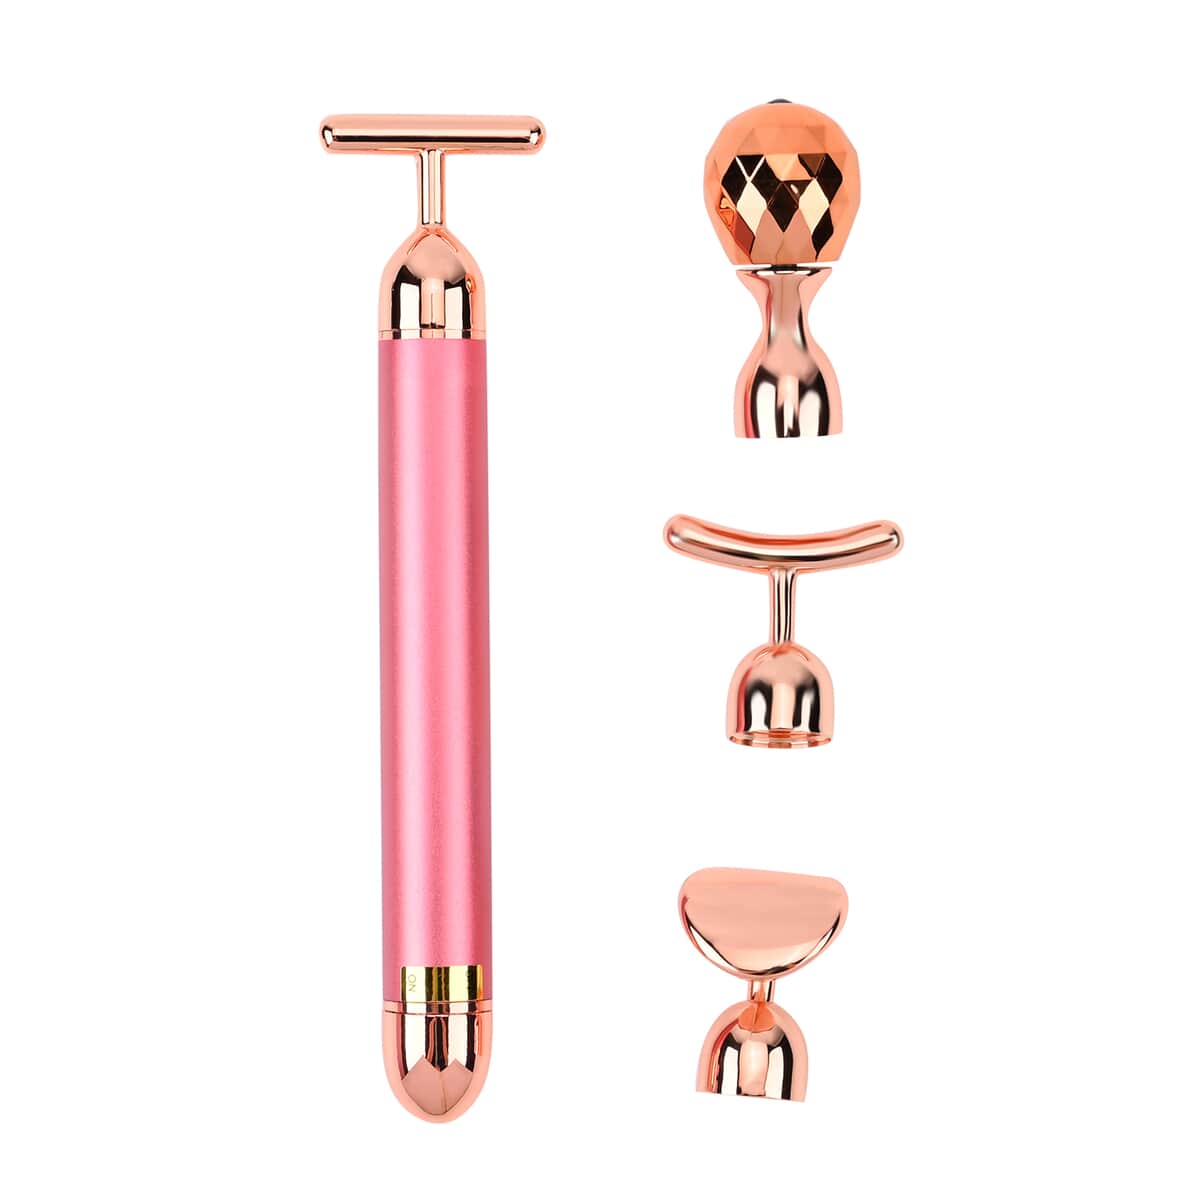 4-in-1 Face Massager Rollers with Four Interchangeable Massage Heads - Rose Gold (5.9"x1.49"), 1xAA Battery Not Including image number 0